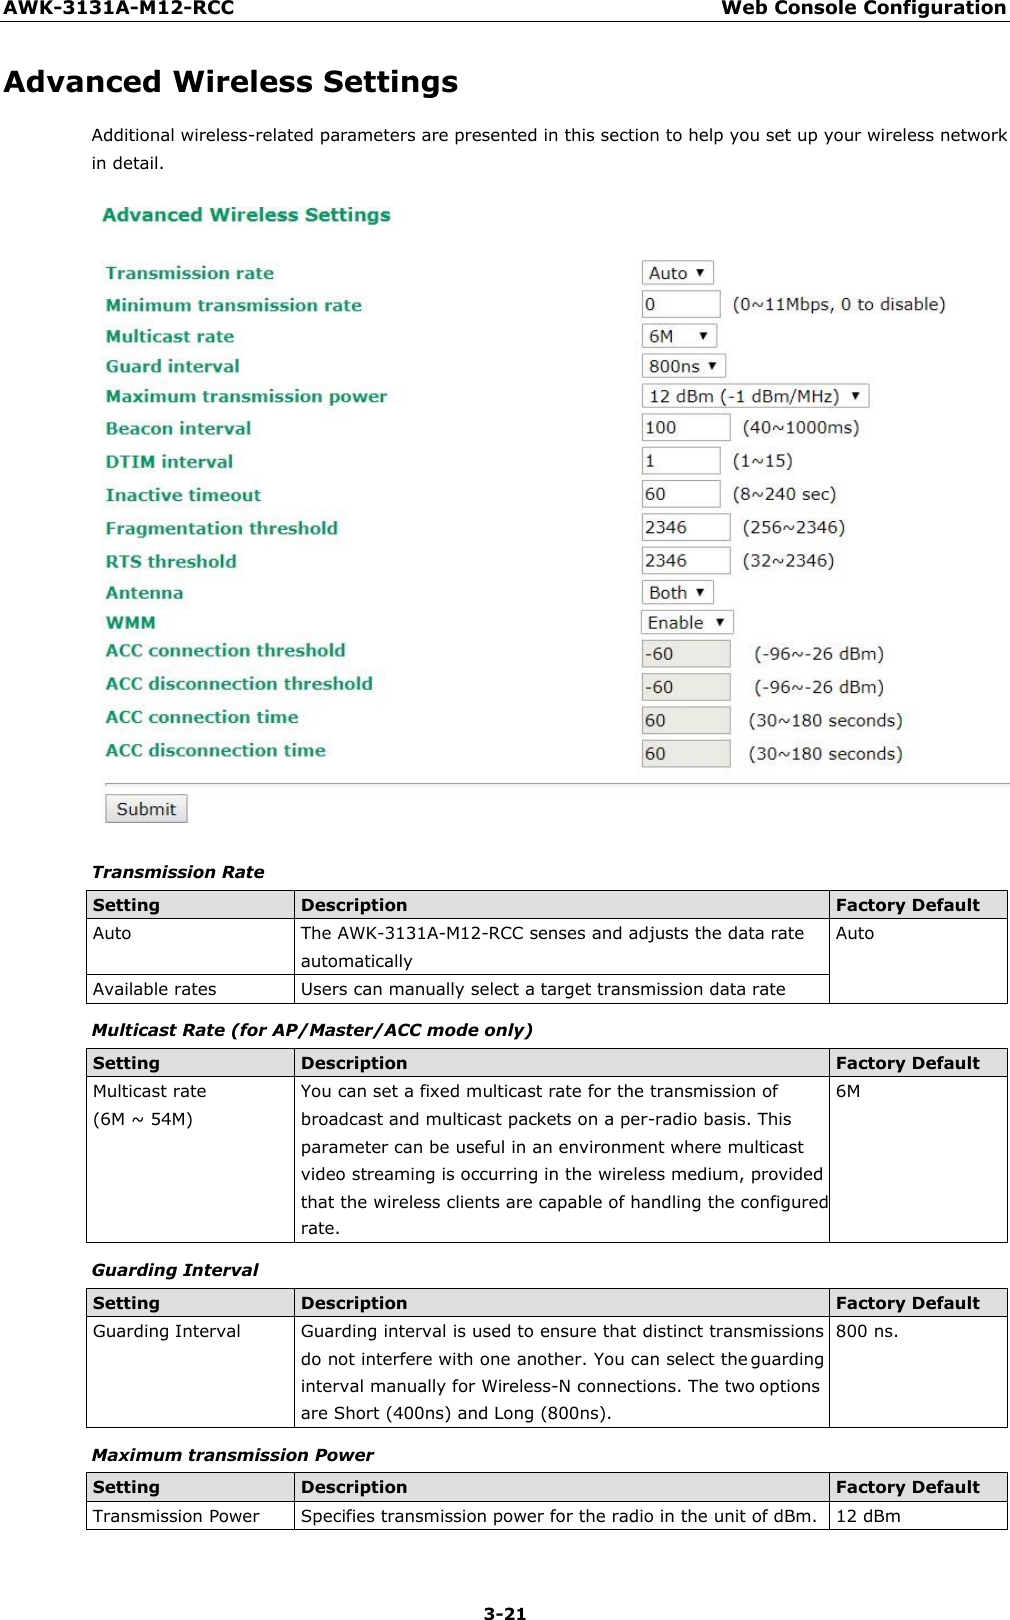 AWK-3131A-M12-RCC Web Console Configuration 3-21    Advanced Wireless Settings Additional wireless-related parameters are presented in this section to help you set up your wireless network in detail.   Transmission Rate  Setting Description Factory Default Auto The AWK-3131A-M12-RCC senses and adjusts the data rate automatically Auto Available rates Users can manually select a target transmission data rate Multicast Rate (for AP/Master/ACC mode only)  Setting Description Factory Default Multicast rate (6M ~ 54M) You can set a fixed multicast rate for the transmission of broadcast and multicast packets on a per-radio basis. This parameter can be useful in an environment where multicast video streaming is occurring in the wireless medium, provided that the wireless clients are capable of handling the configured rate. 6M Guarding Interval  Setting Description Factory Default Guarding Interval Guarding interval is used to ensure that distinct transmissions do not interfere with one another. You can select the guarding interval manually for Wireless-N connections. The two options are Short (400ns) and Long (800ns). 800 ns. Maximum transmission Power  Setting Description Factory Default Transmission Power Specifies transmission power for the radio in the unit of dBm. 12 dBm 